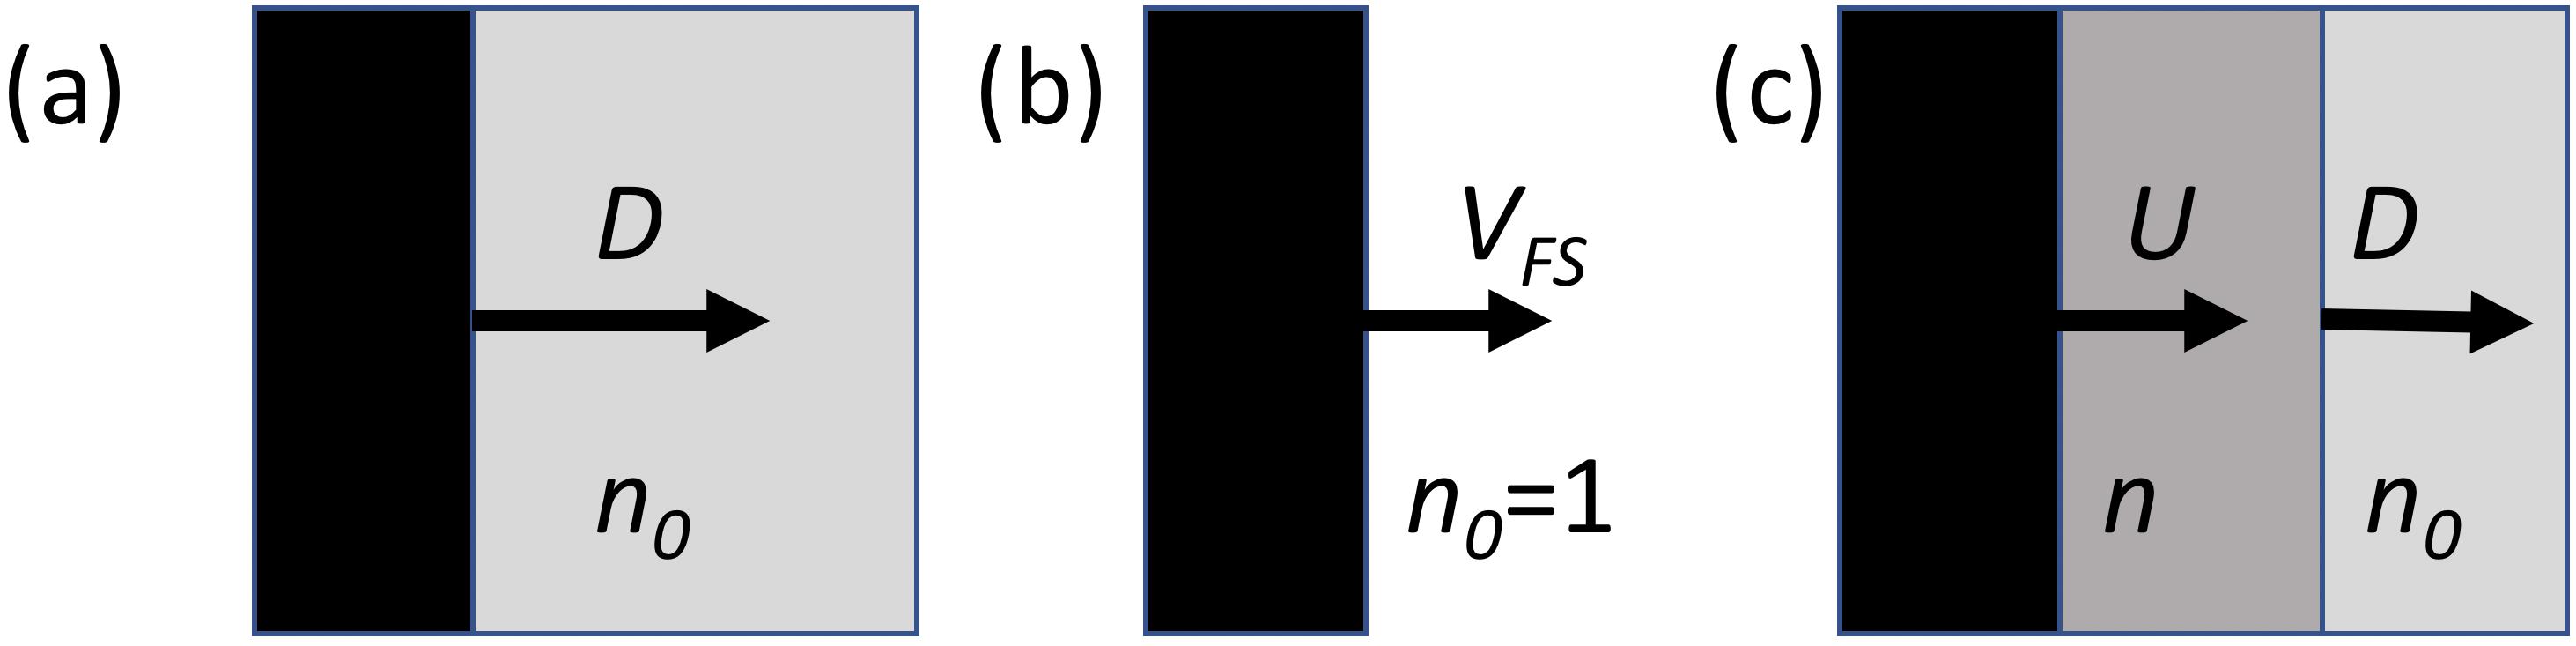 Reflection of the VISAR probe beam: (a) from a reflecting shock traveling in the material; (b) from a free surface travelling in vacuum; (c) from a reflecting surface embedded in a compressed transparent material.